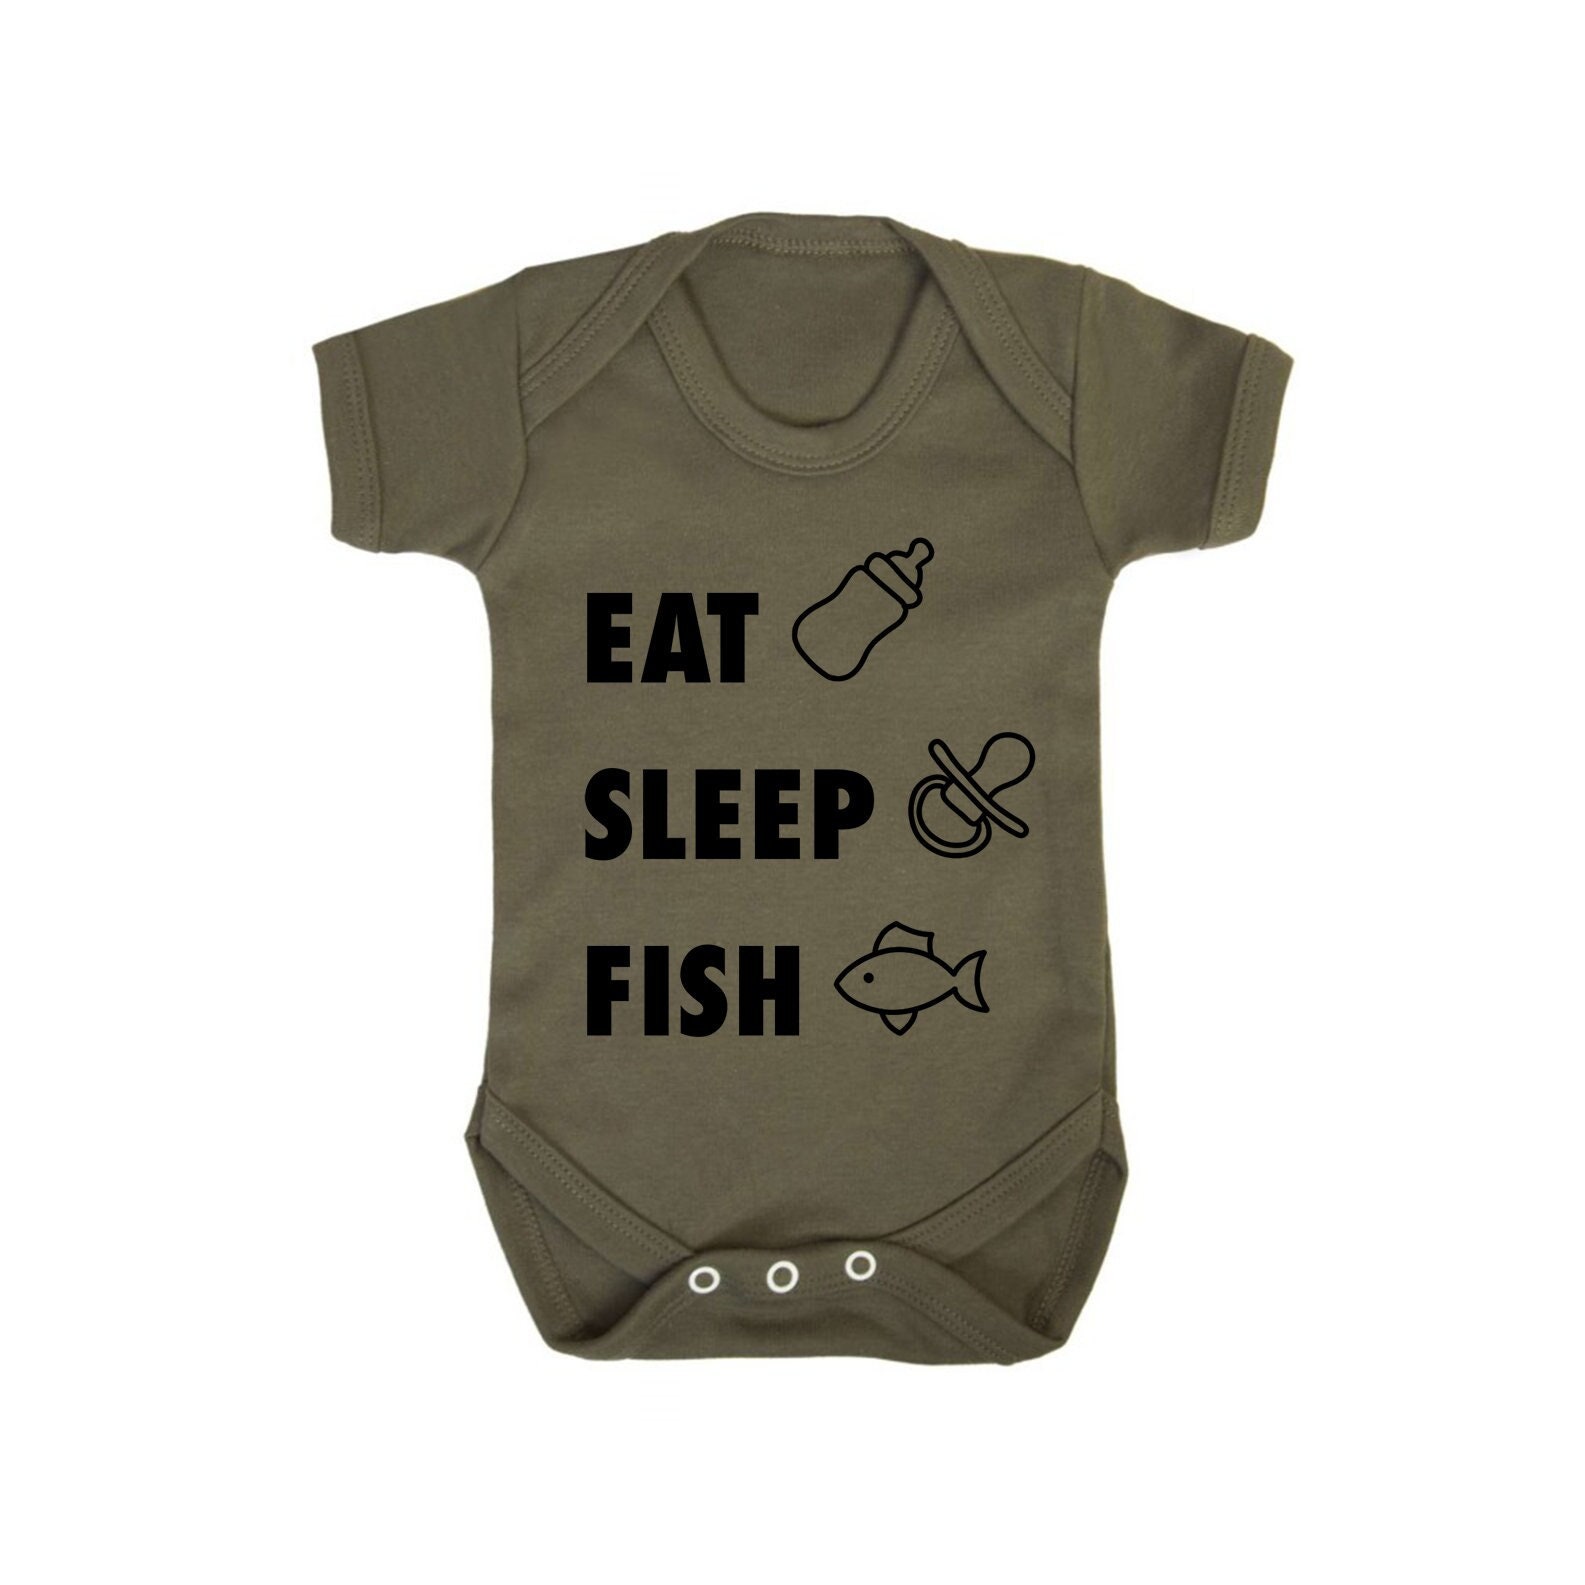 Eat Sleep Fish - On Military Green Baby Bodysuit Vest.. ideal gift for any  fishing enthusiasts, birth, baby shower, toddler